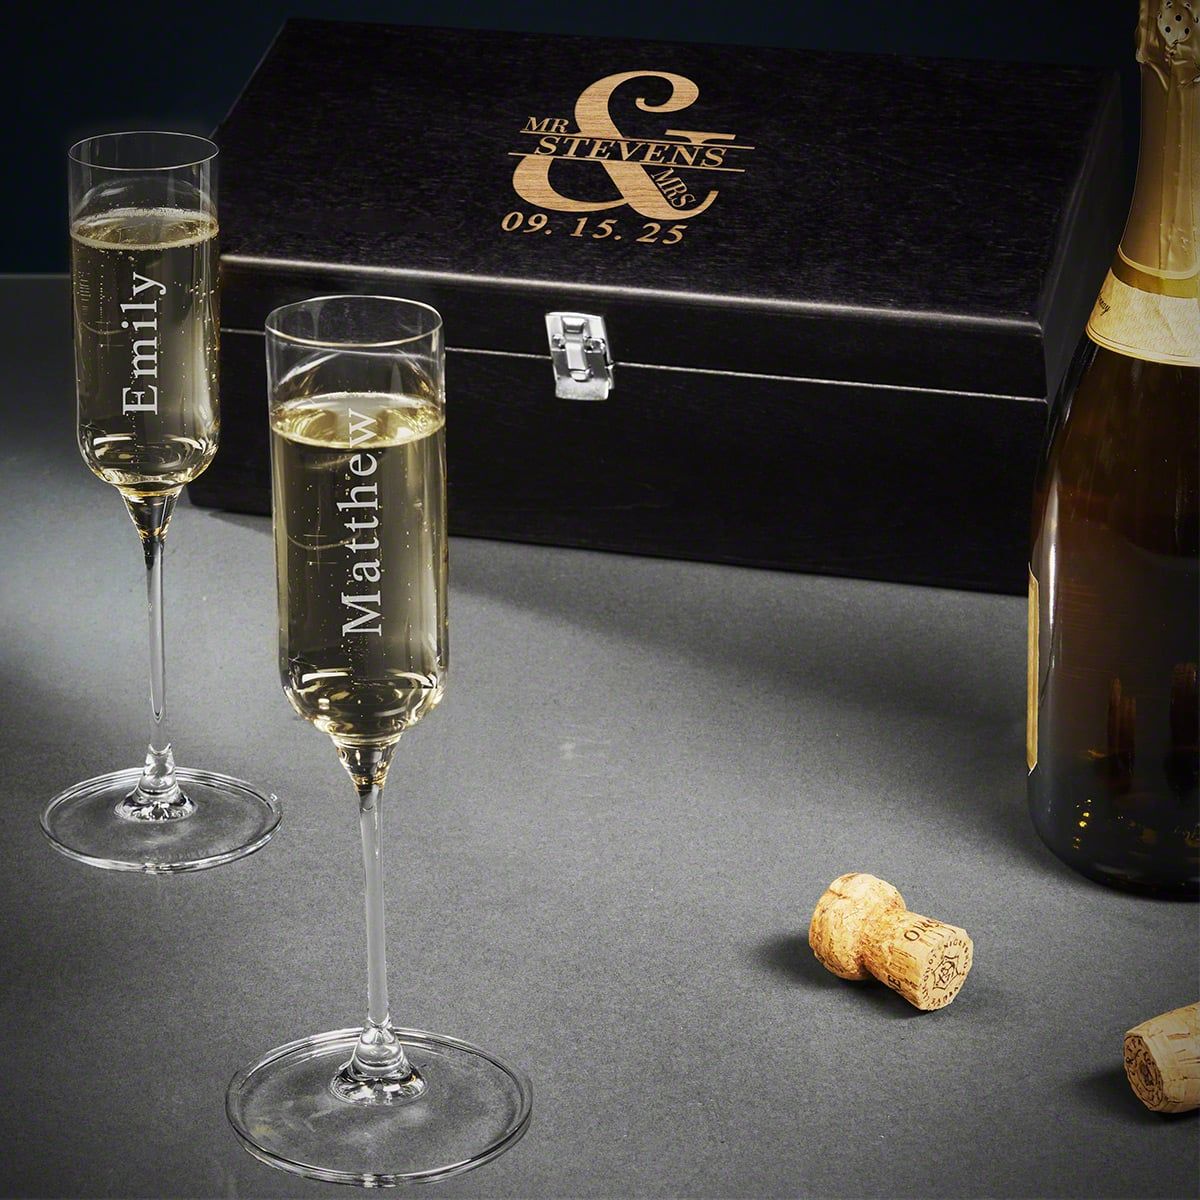 https://images.homewetbar.com/media/catalog/product/l/o/love-and-marriage-premium-champagne-black-gift-set-p_9100.jpg?store=default&image-type=image